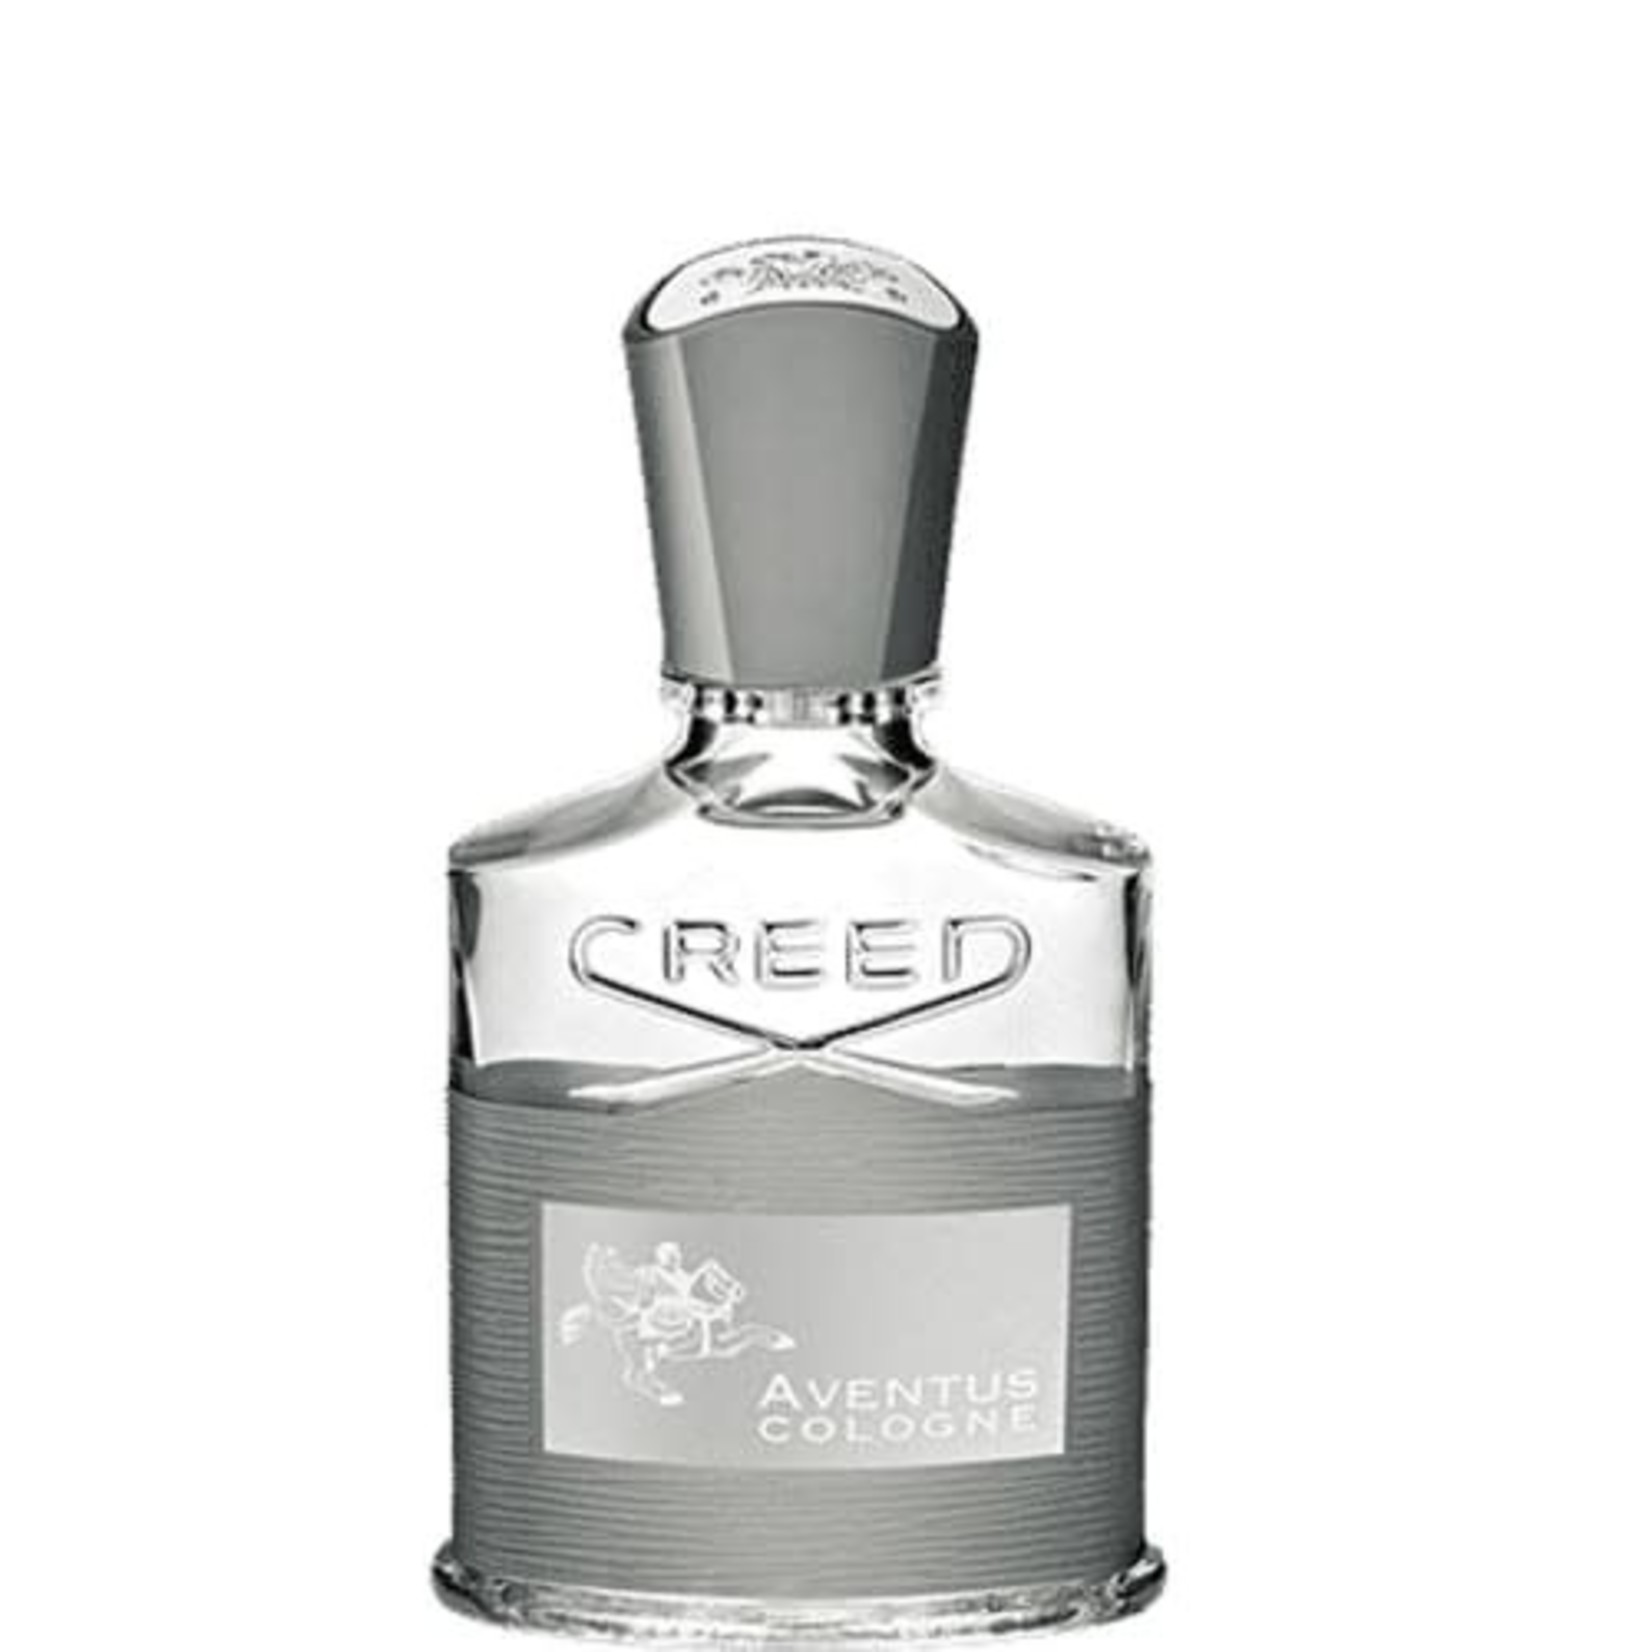 CREED CREED- AVENTUS - COLOGNE